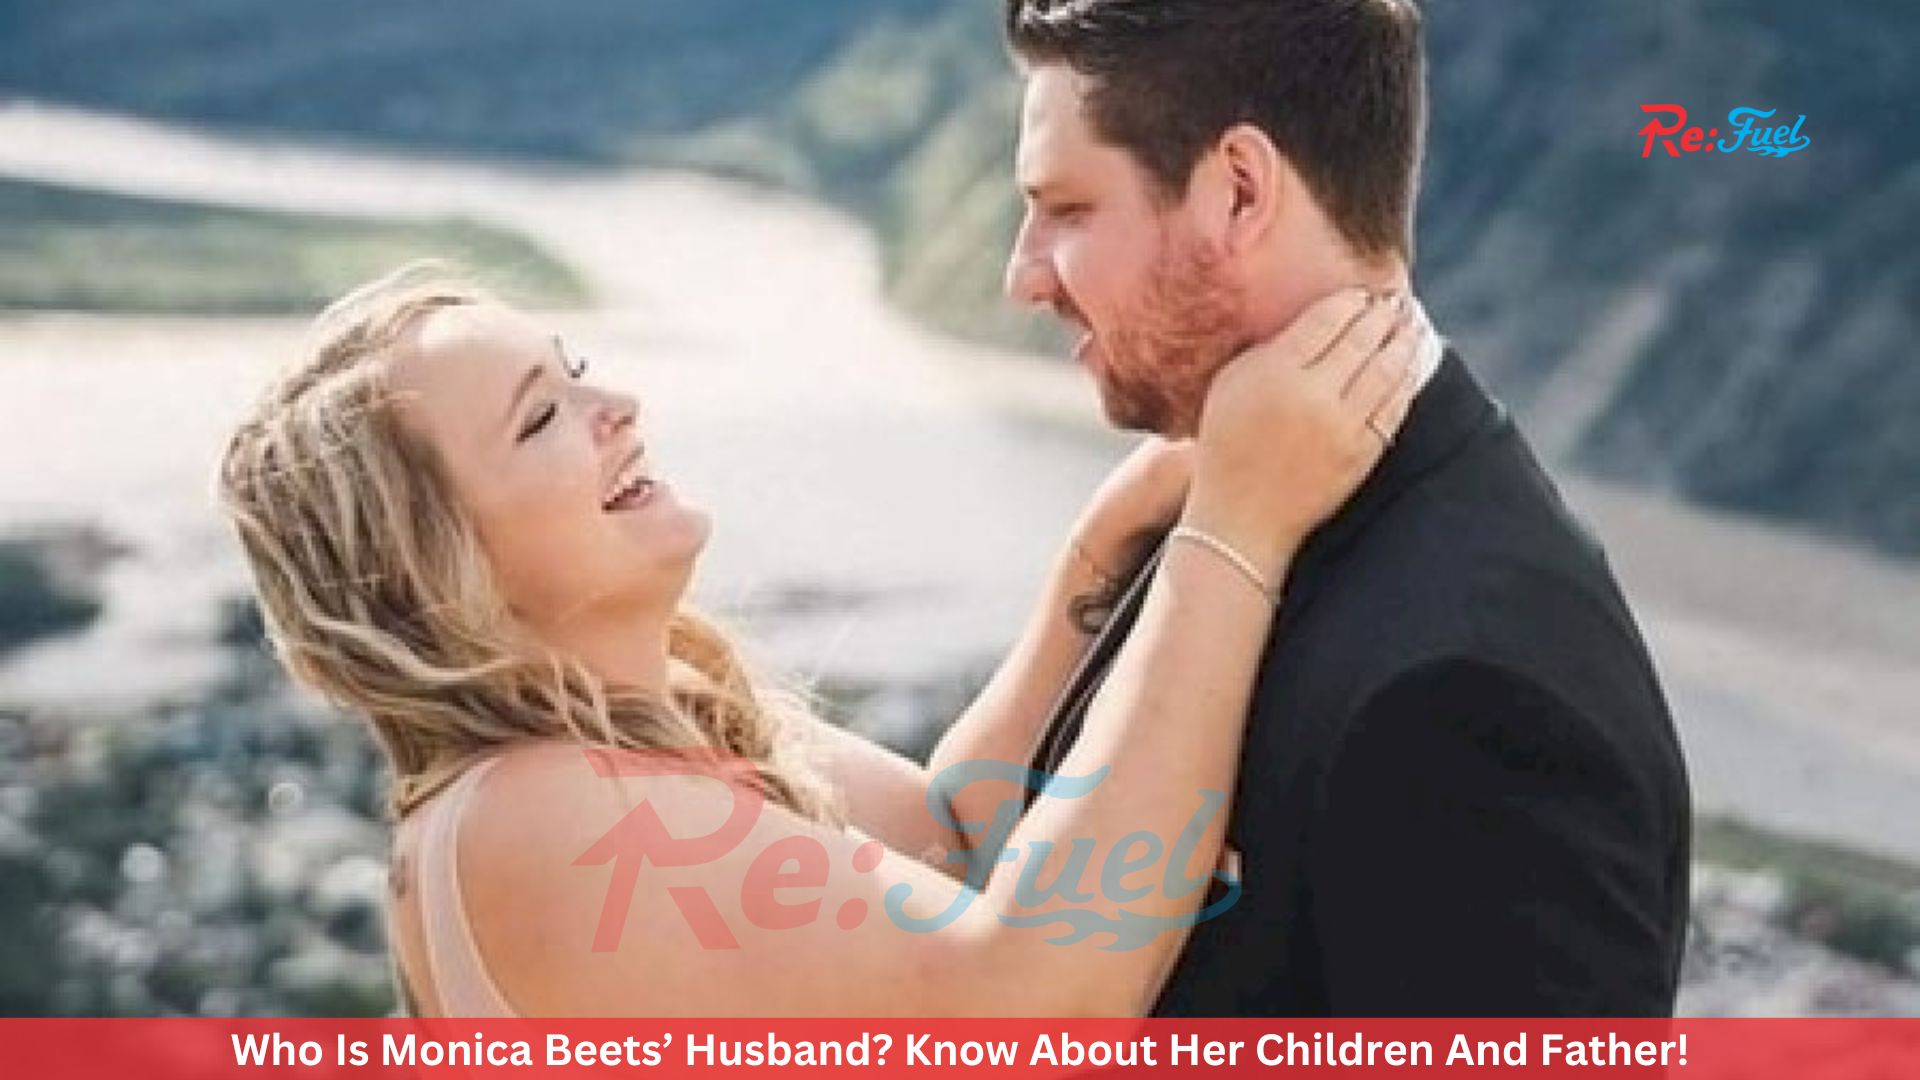 Who Is Monica Beets’ Husband? Know About Her Children And Father!